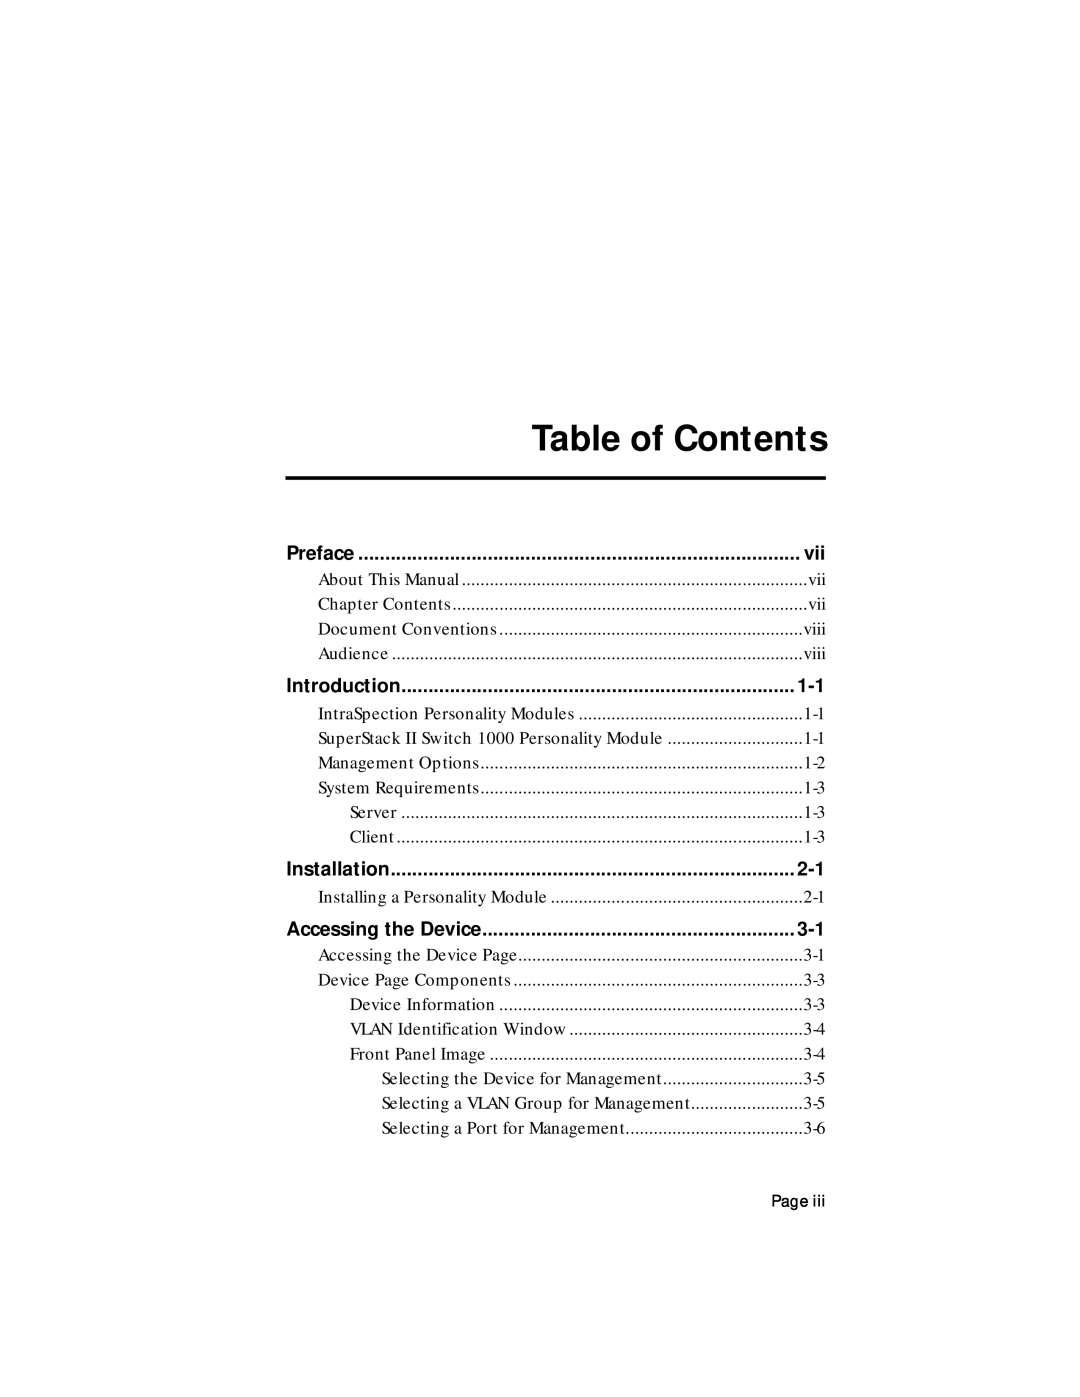 Asante Technologies 1000 user manual Table of Contents, Preface, Introduction, Installation, Accessing the Device 